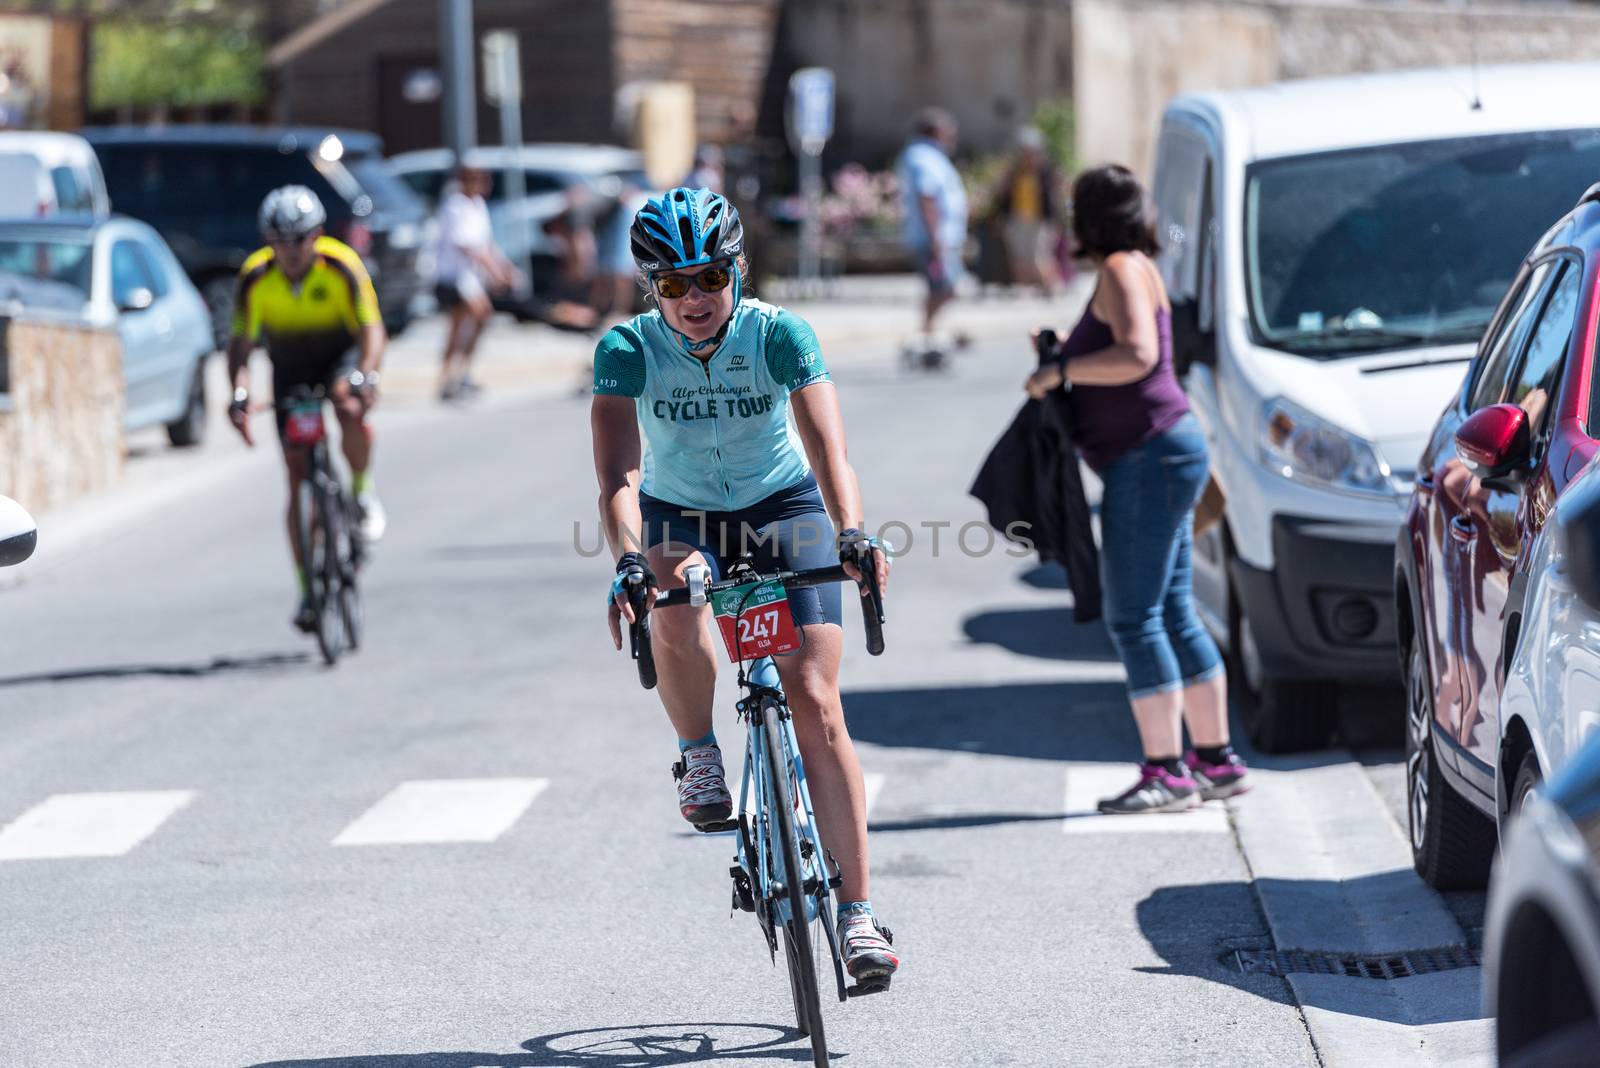 Cyclists in Amateur Race La Cerdanya Cycle Tour 2020 in Les Angl by martinscphoto